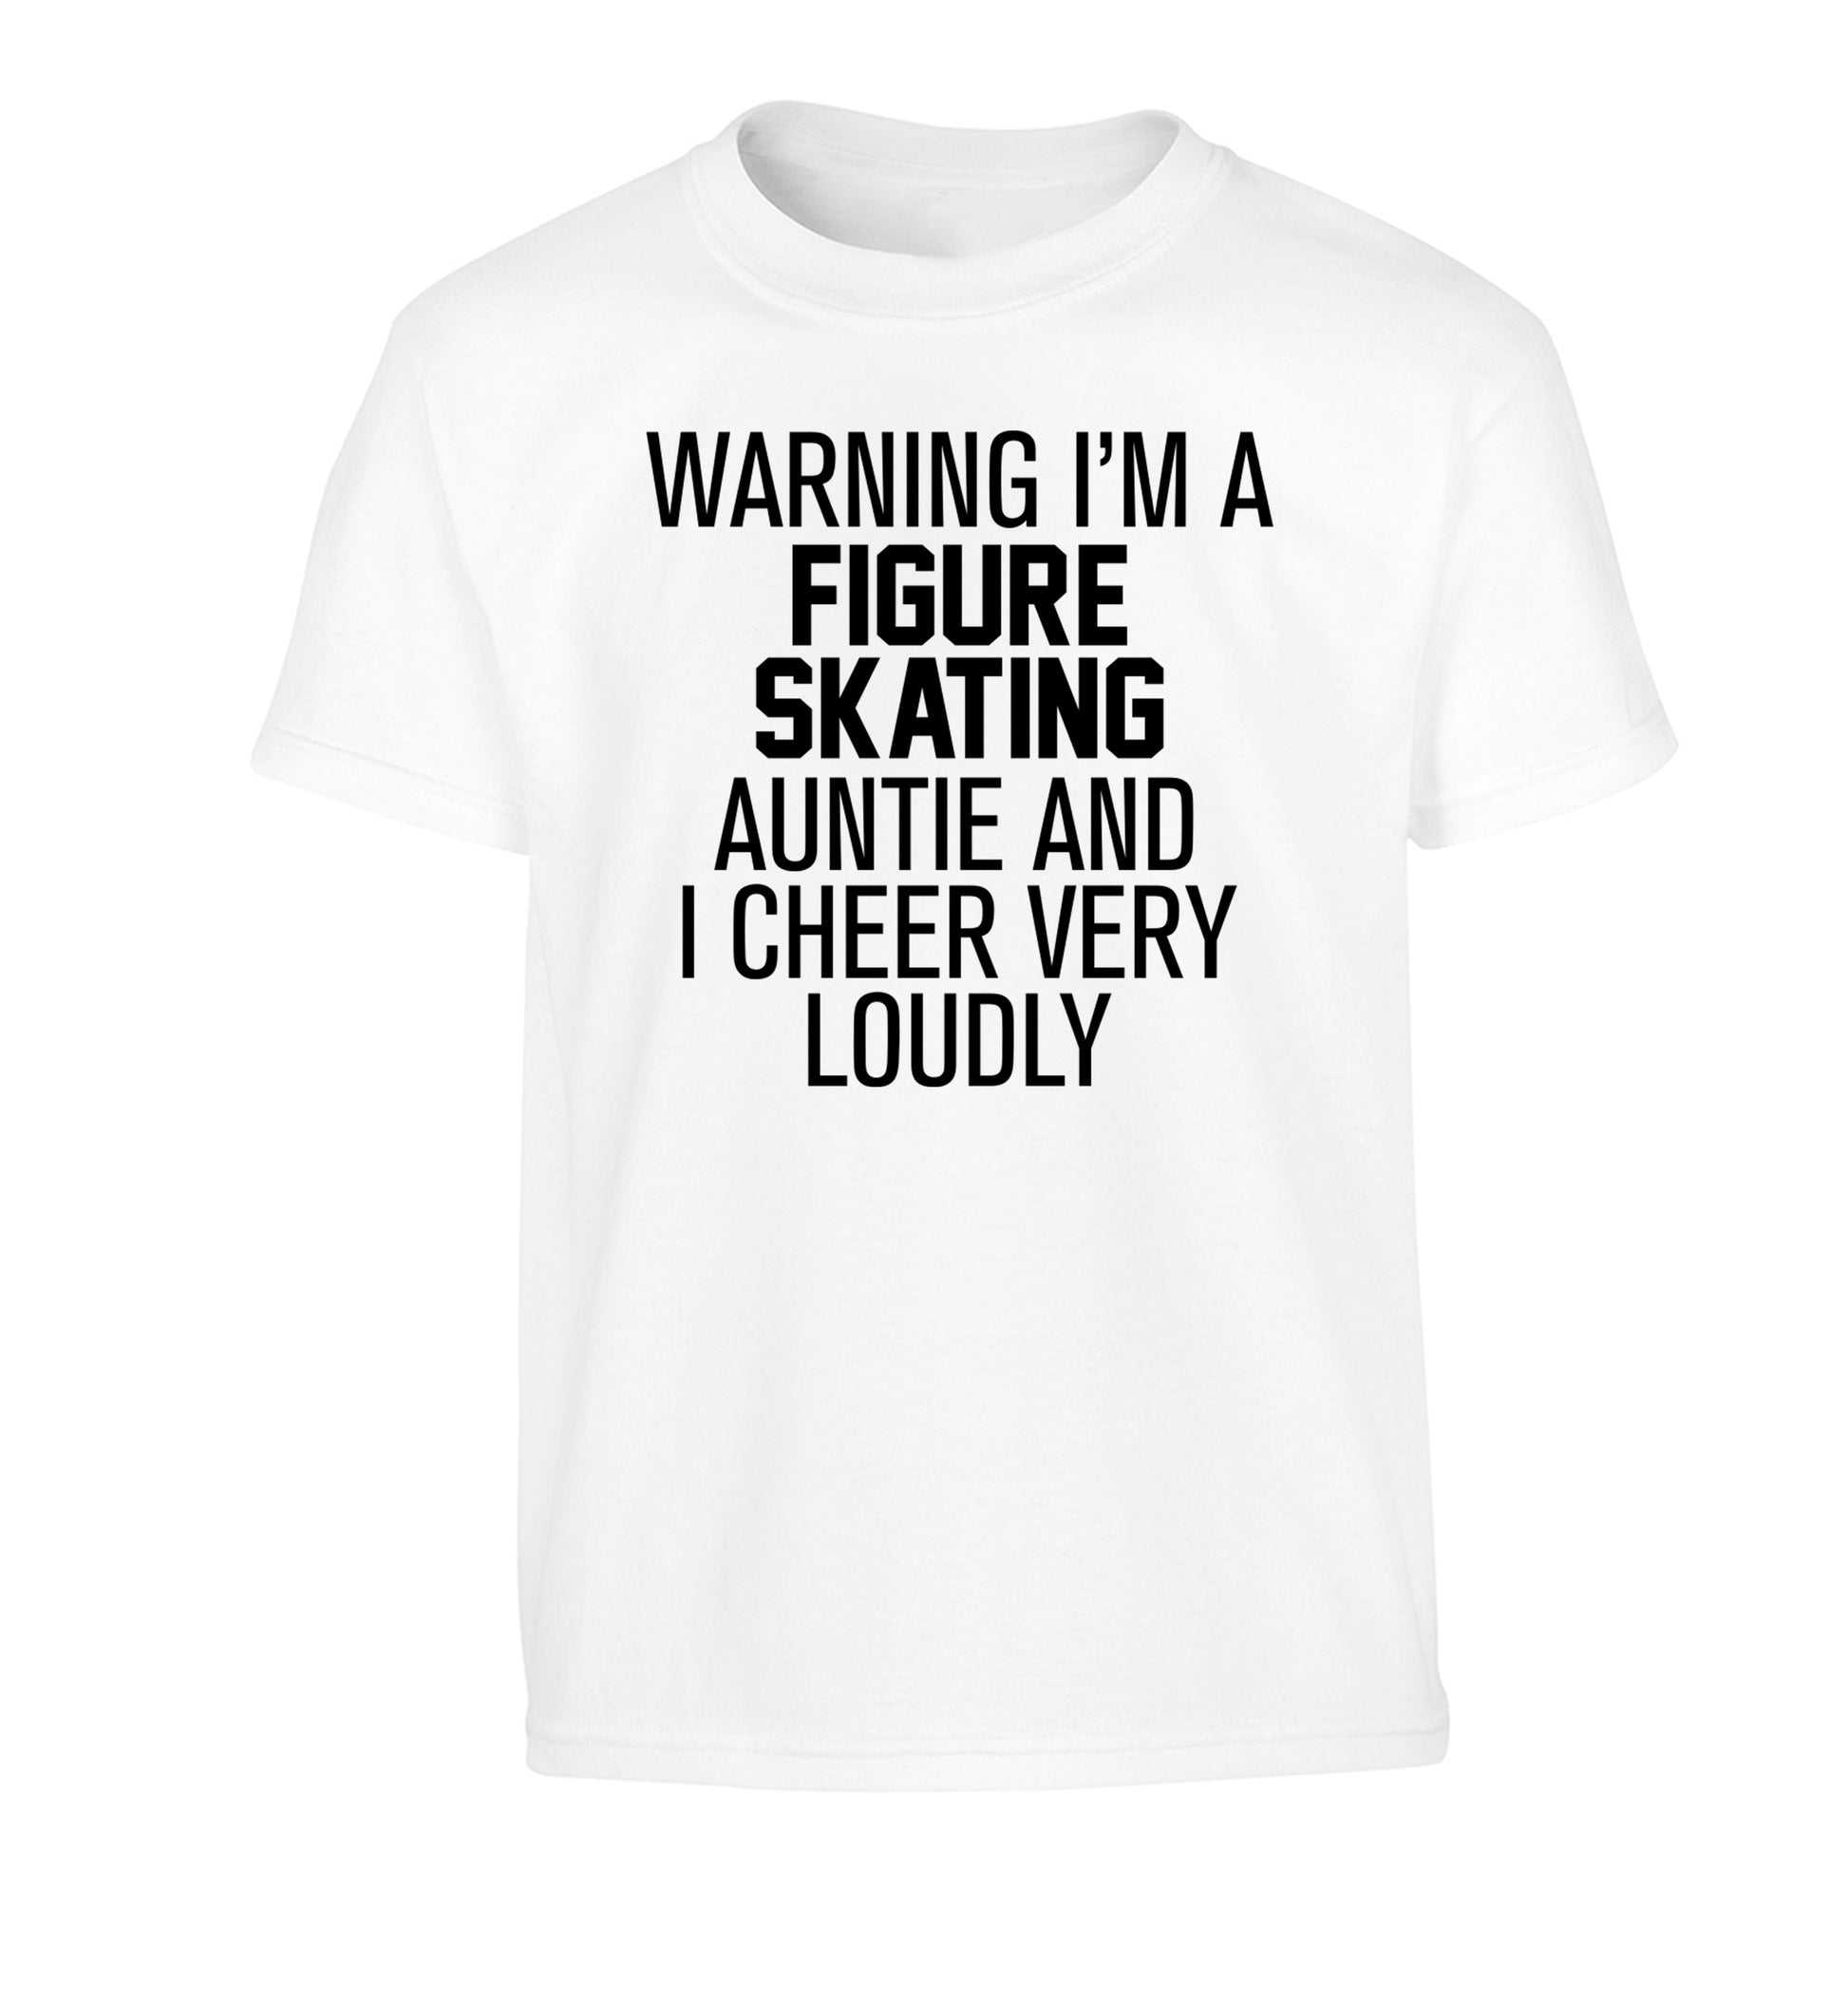 Warning I'm a figure skating auntie and I cheer very loudly Children's white Tshirt 12-14 Years